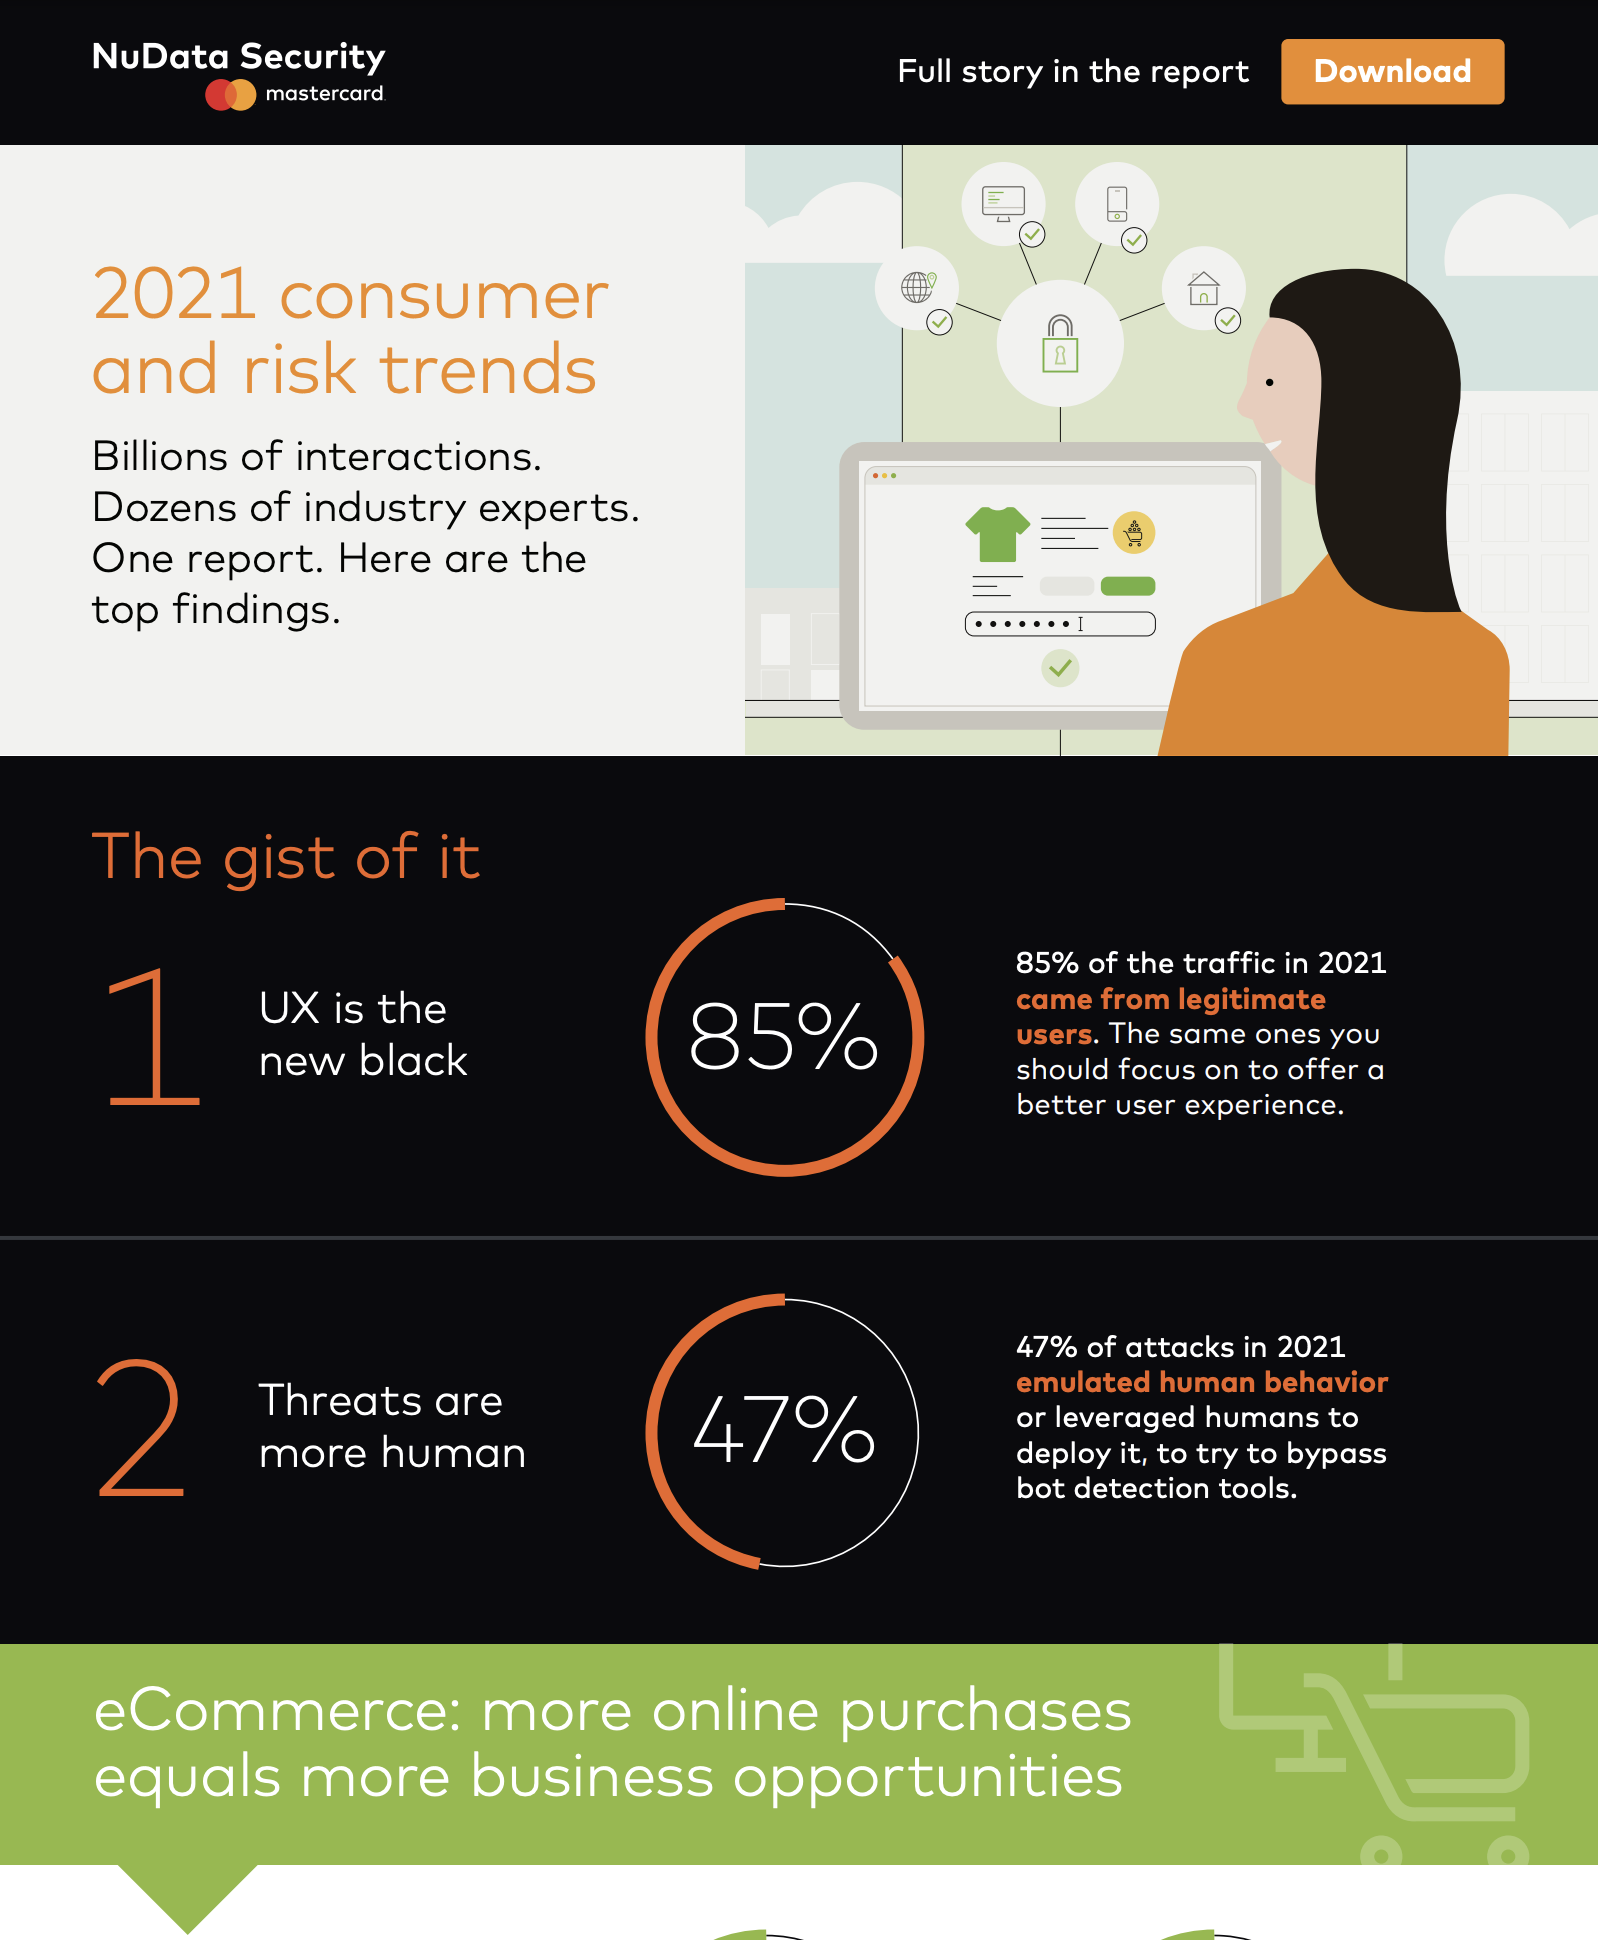 2021 consumer and risk trends infographic